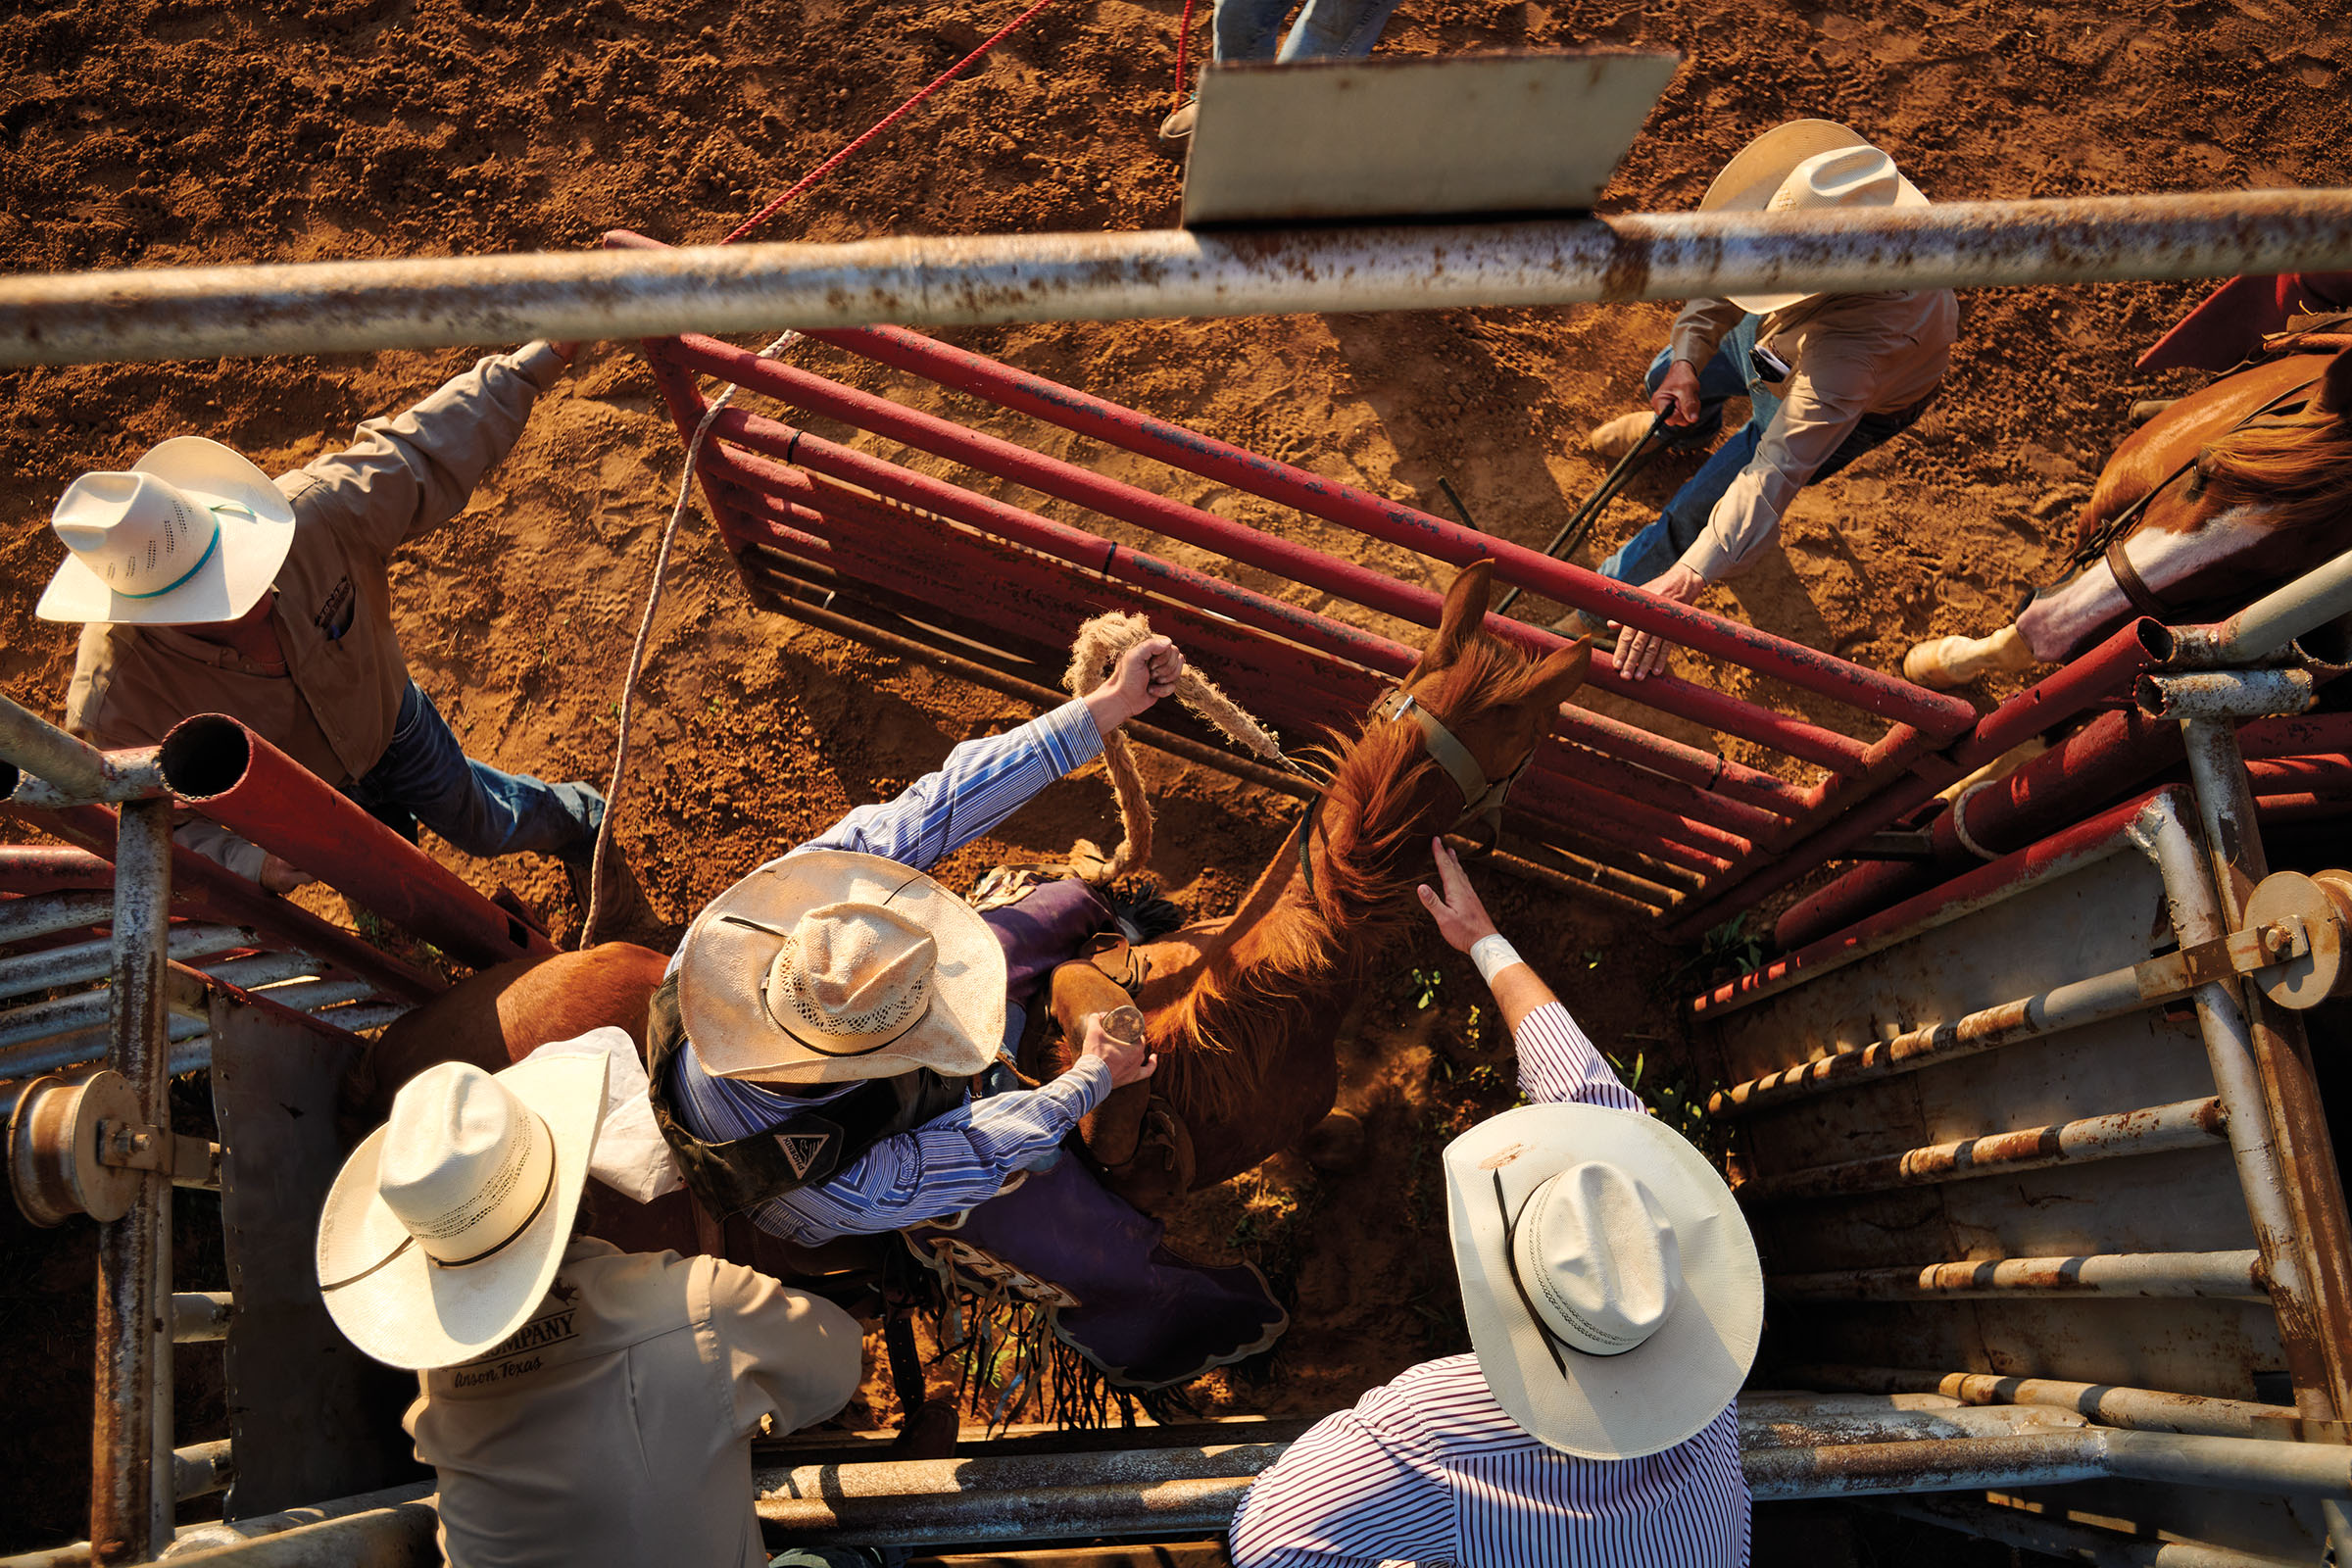 An overhead view of several men in white cowboy hats opening a gate and attempting to tame a bucking horse